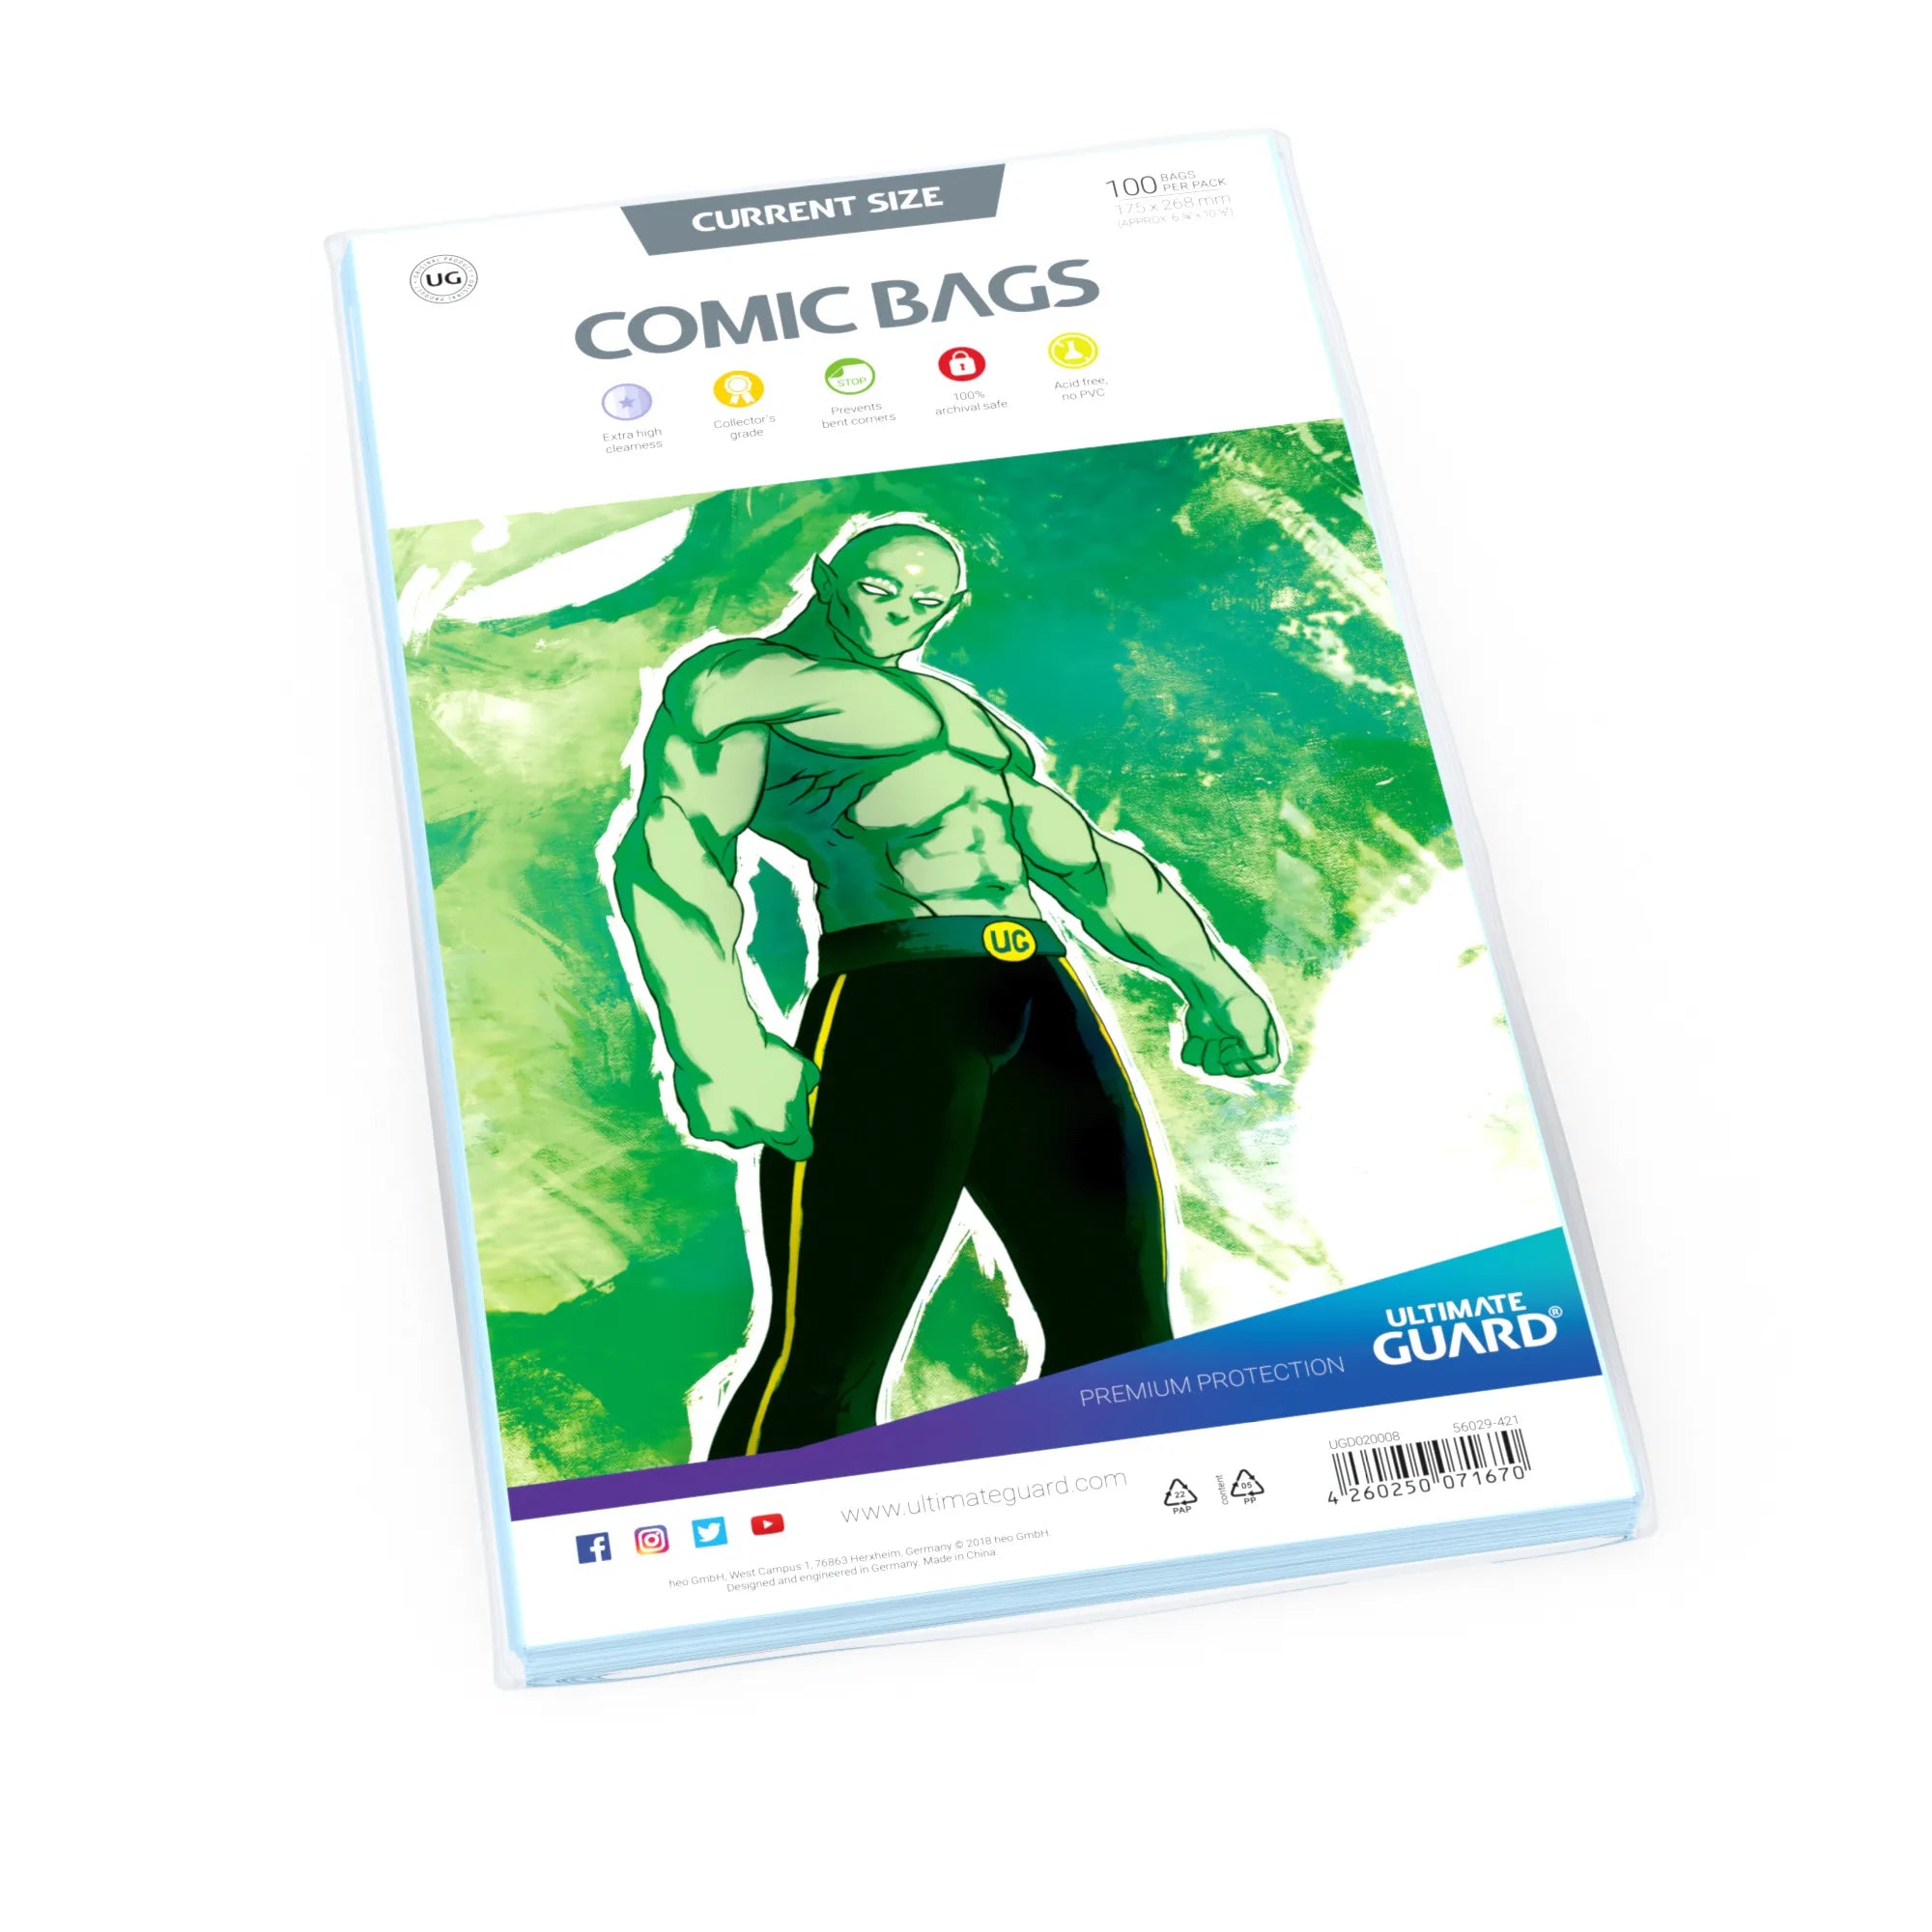 Ultimate Guard CURRENT STANDARD Comic Bags - Pack of 100